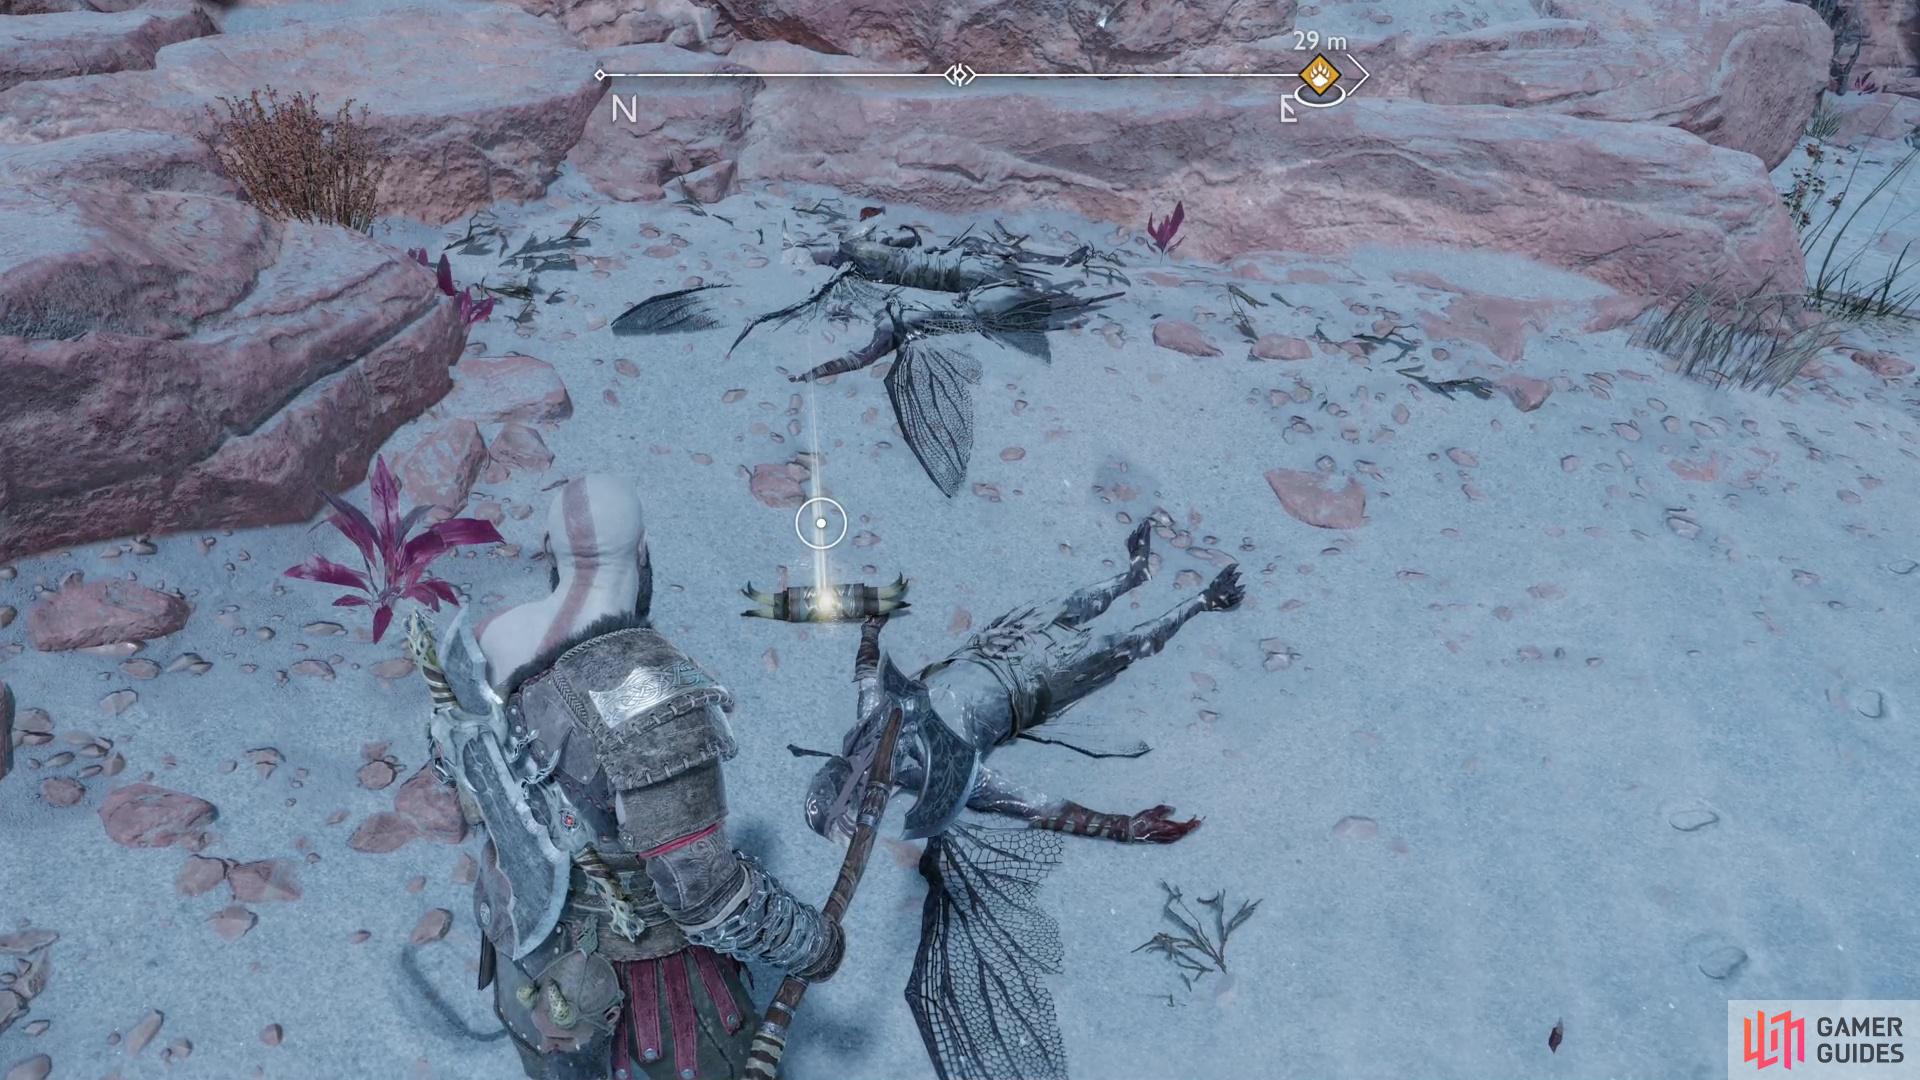 You'll see the Vulture's Gold map next to some dead Dark Elves.